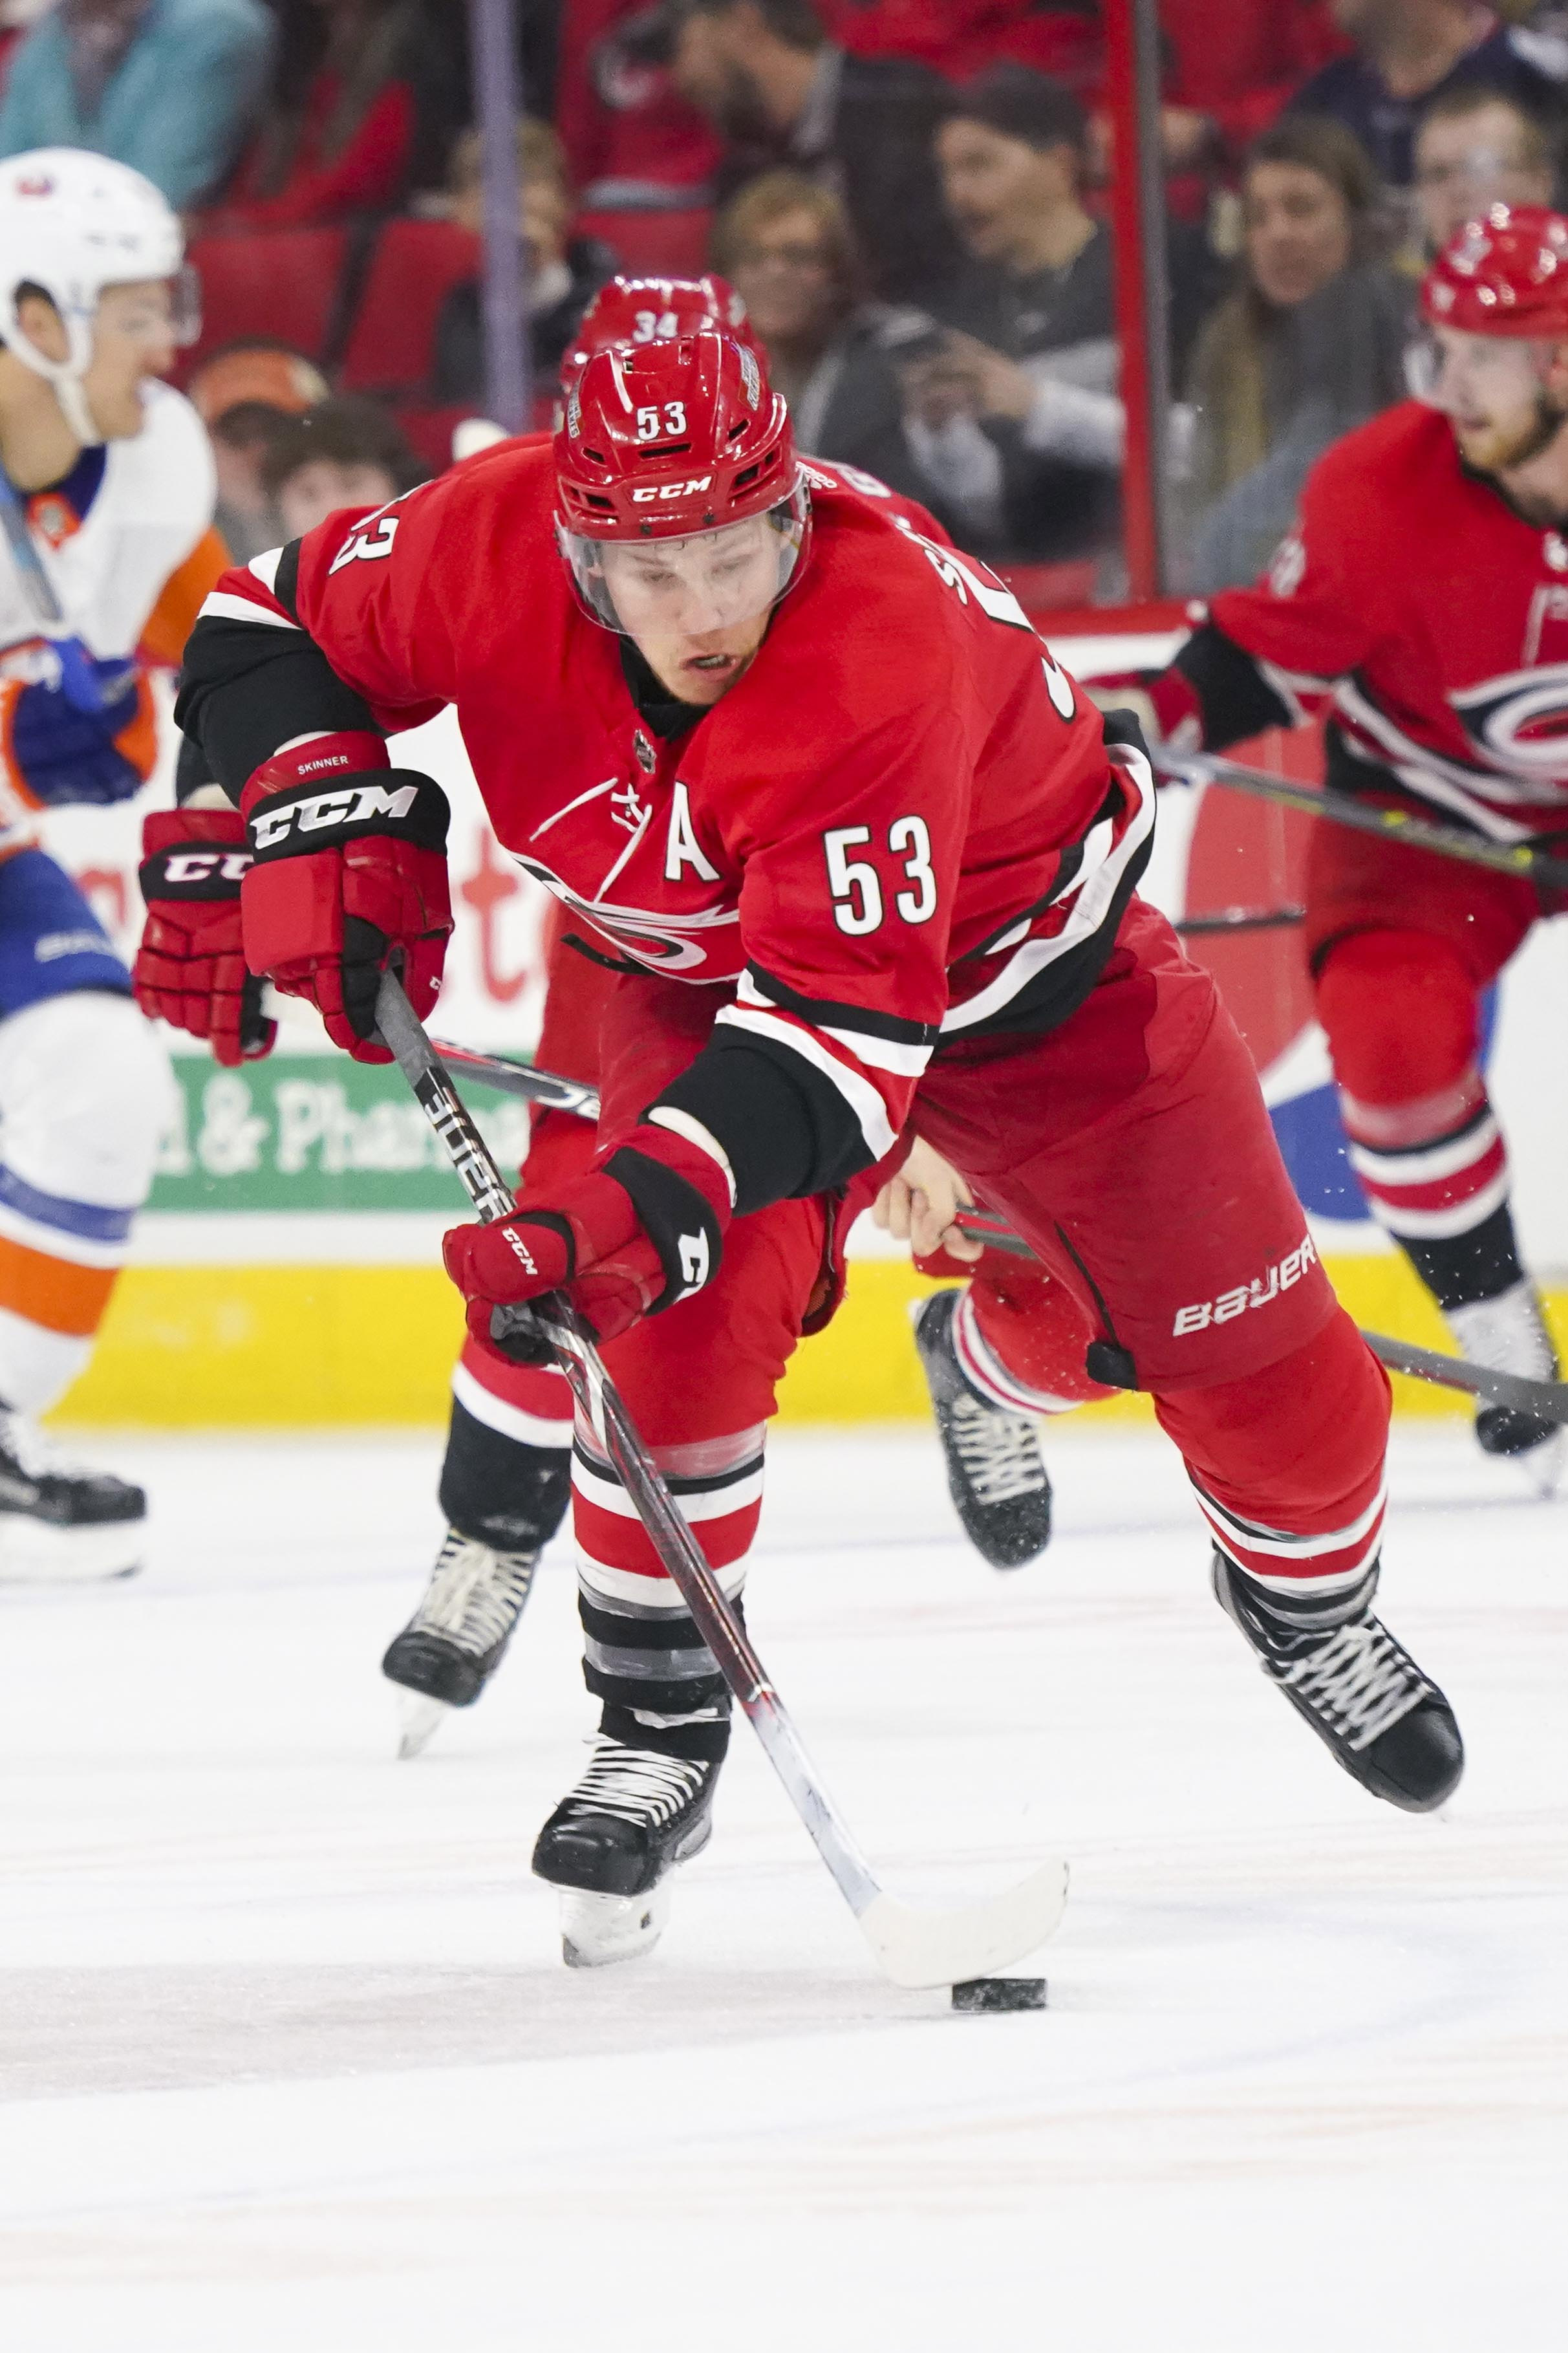 Jeff Skinner says he doesn't want to be traded by Sabres after